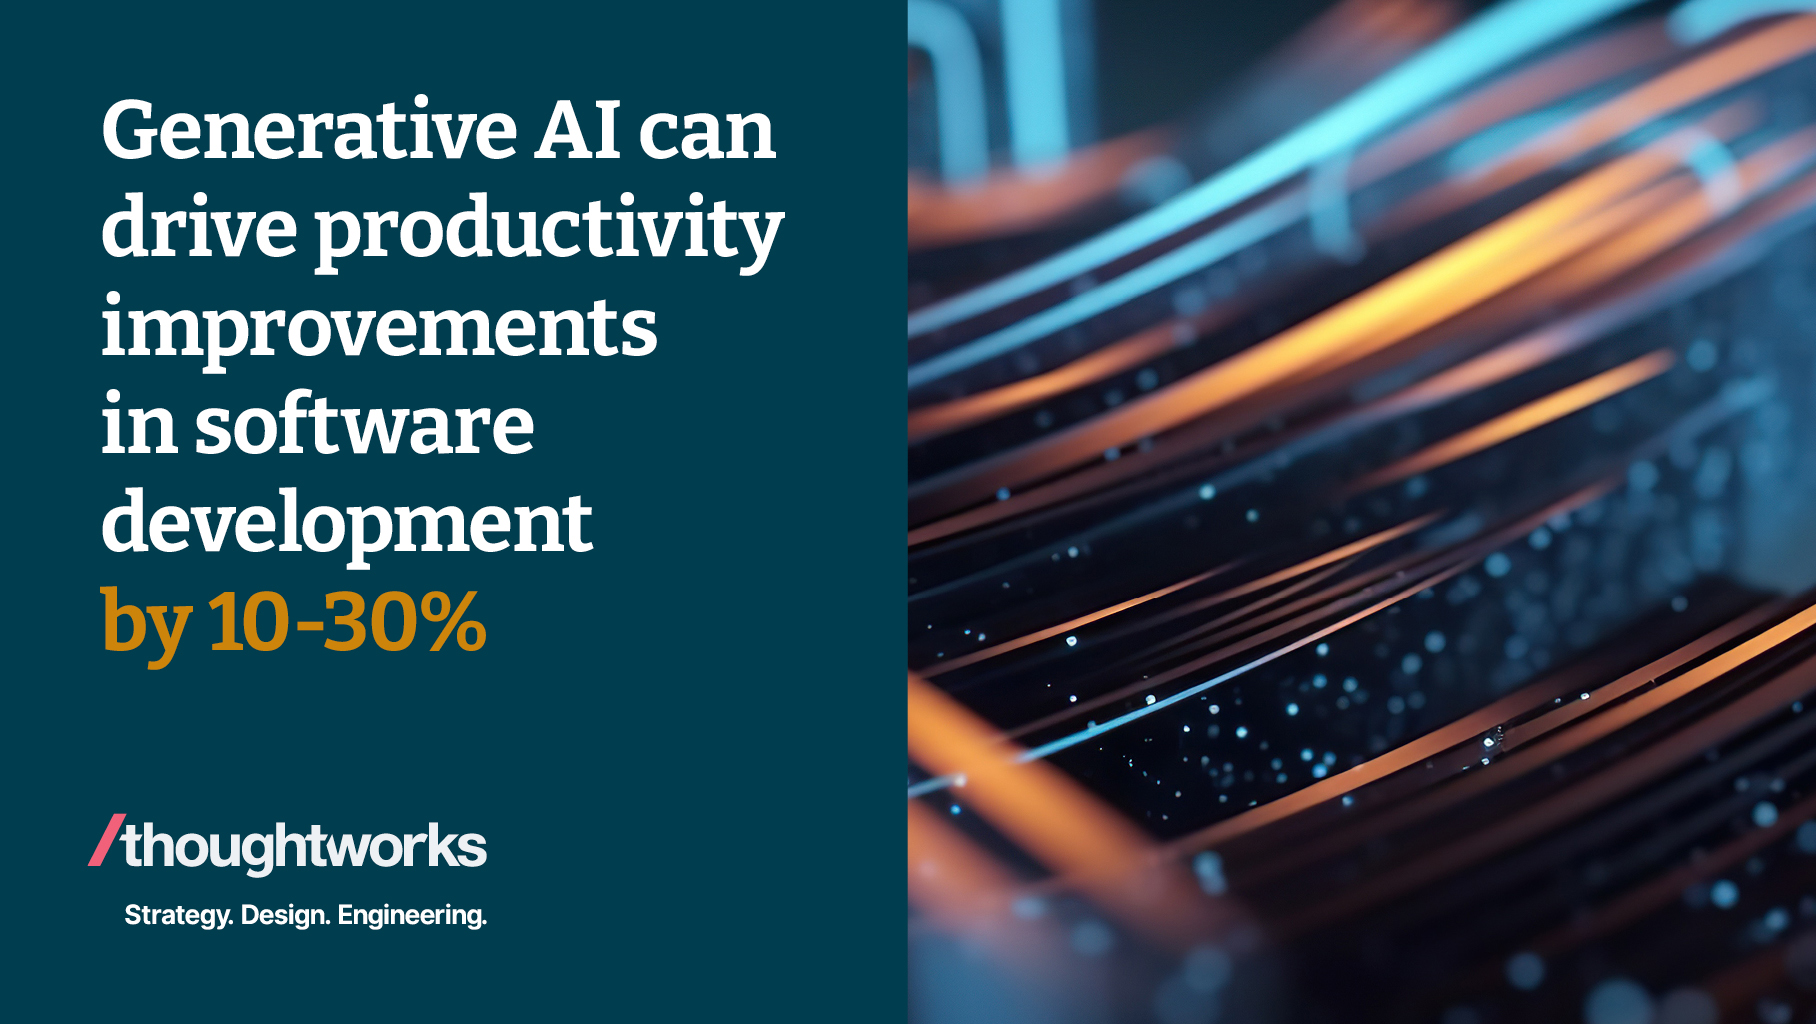 Generative AI can drive productivity improvements in software development by 10-30%